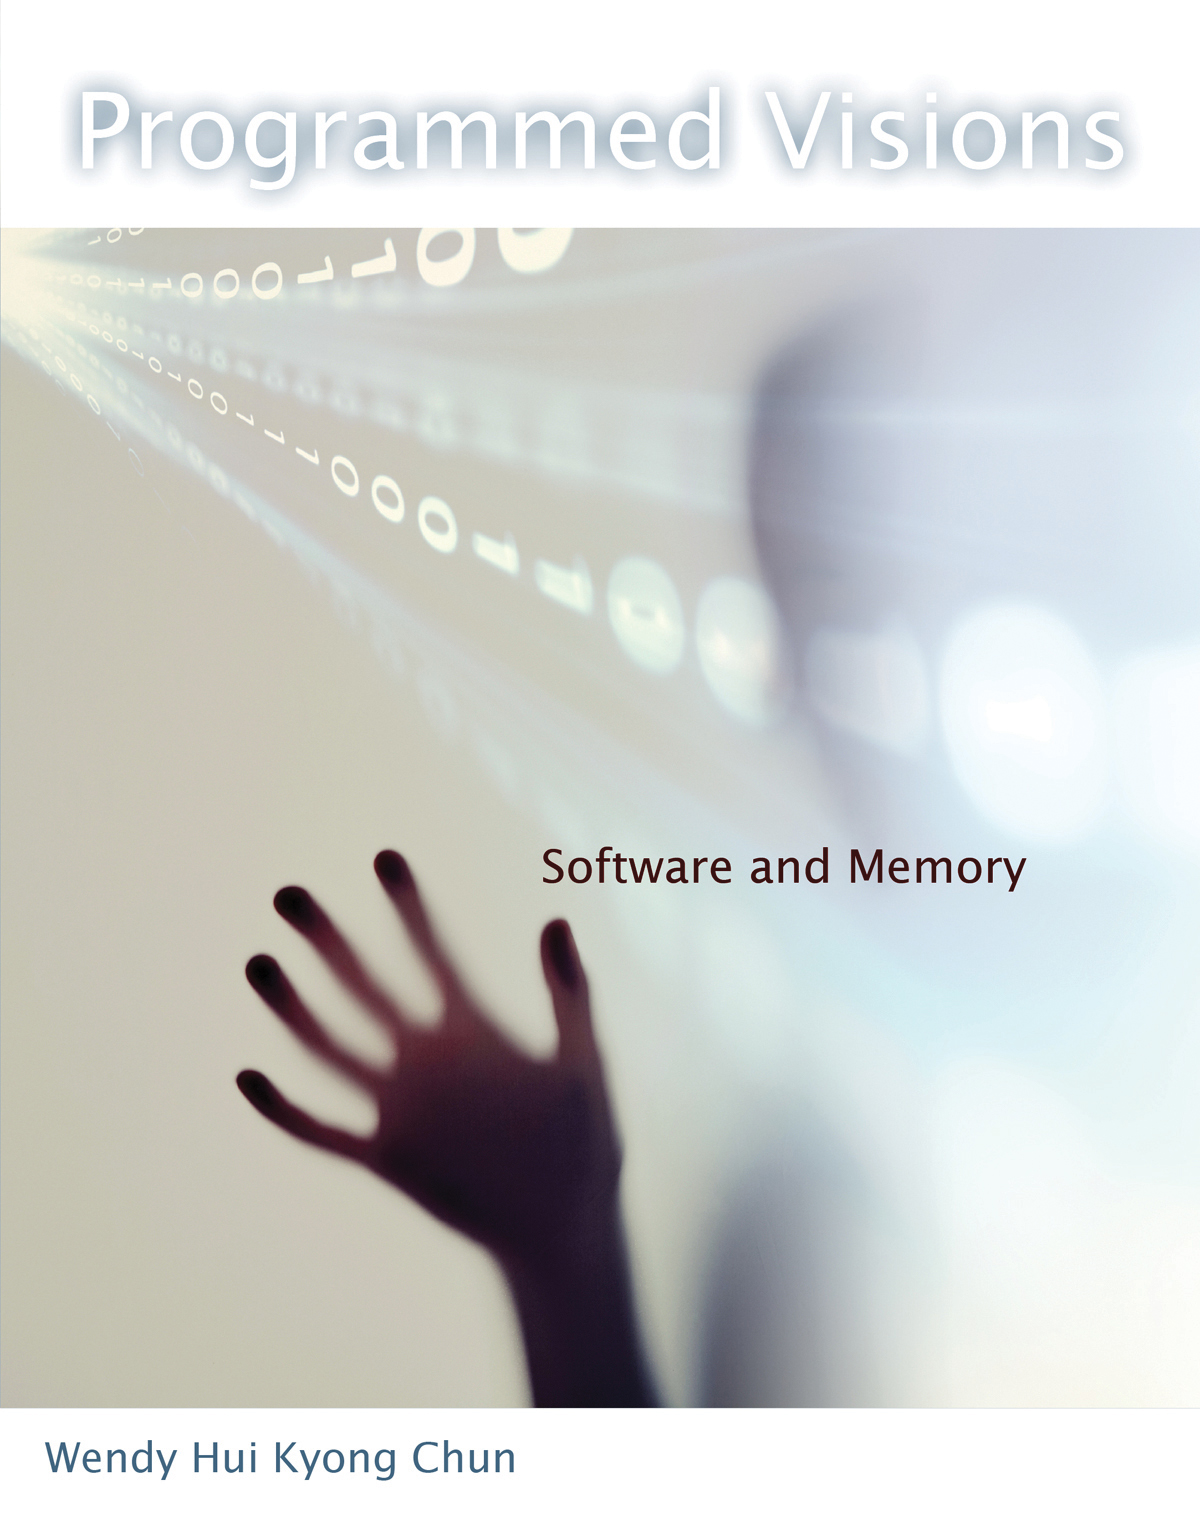 “Wendy Hui Kyong Chun, Programmed Visions: Software and Memory” co-authored with Lisa Gitelman